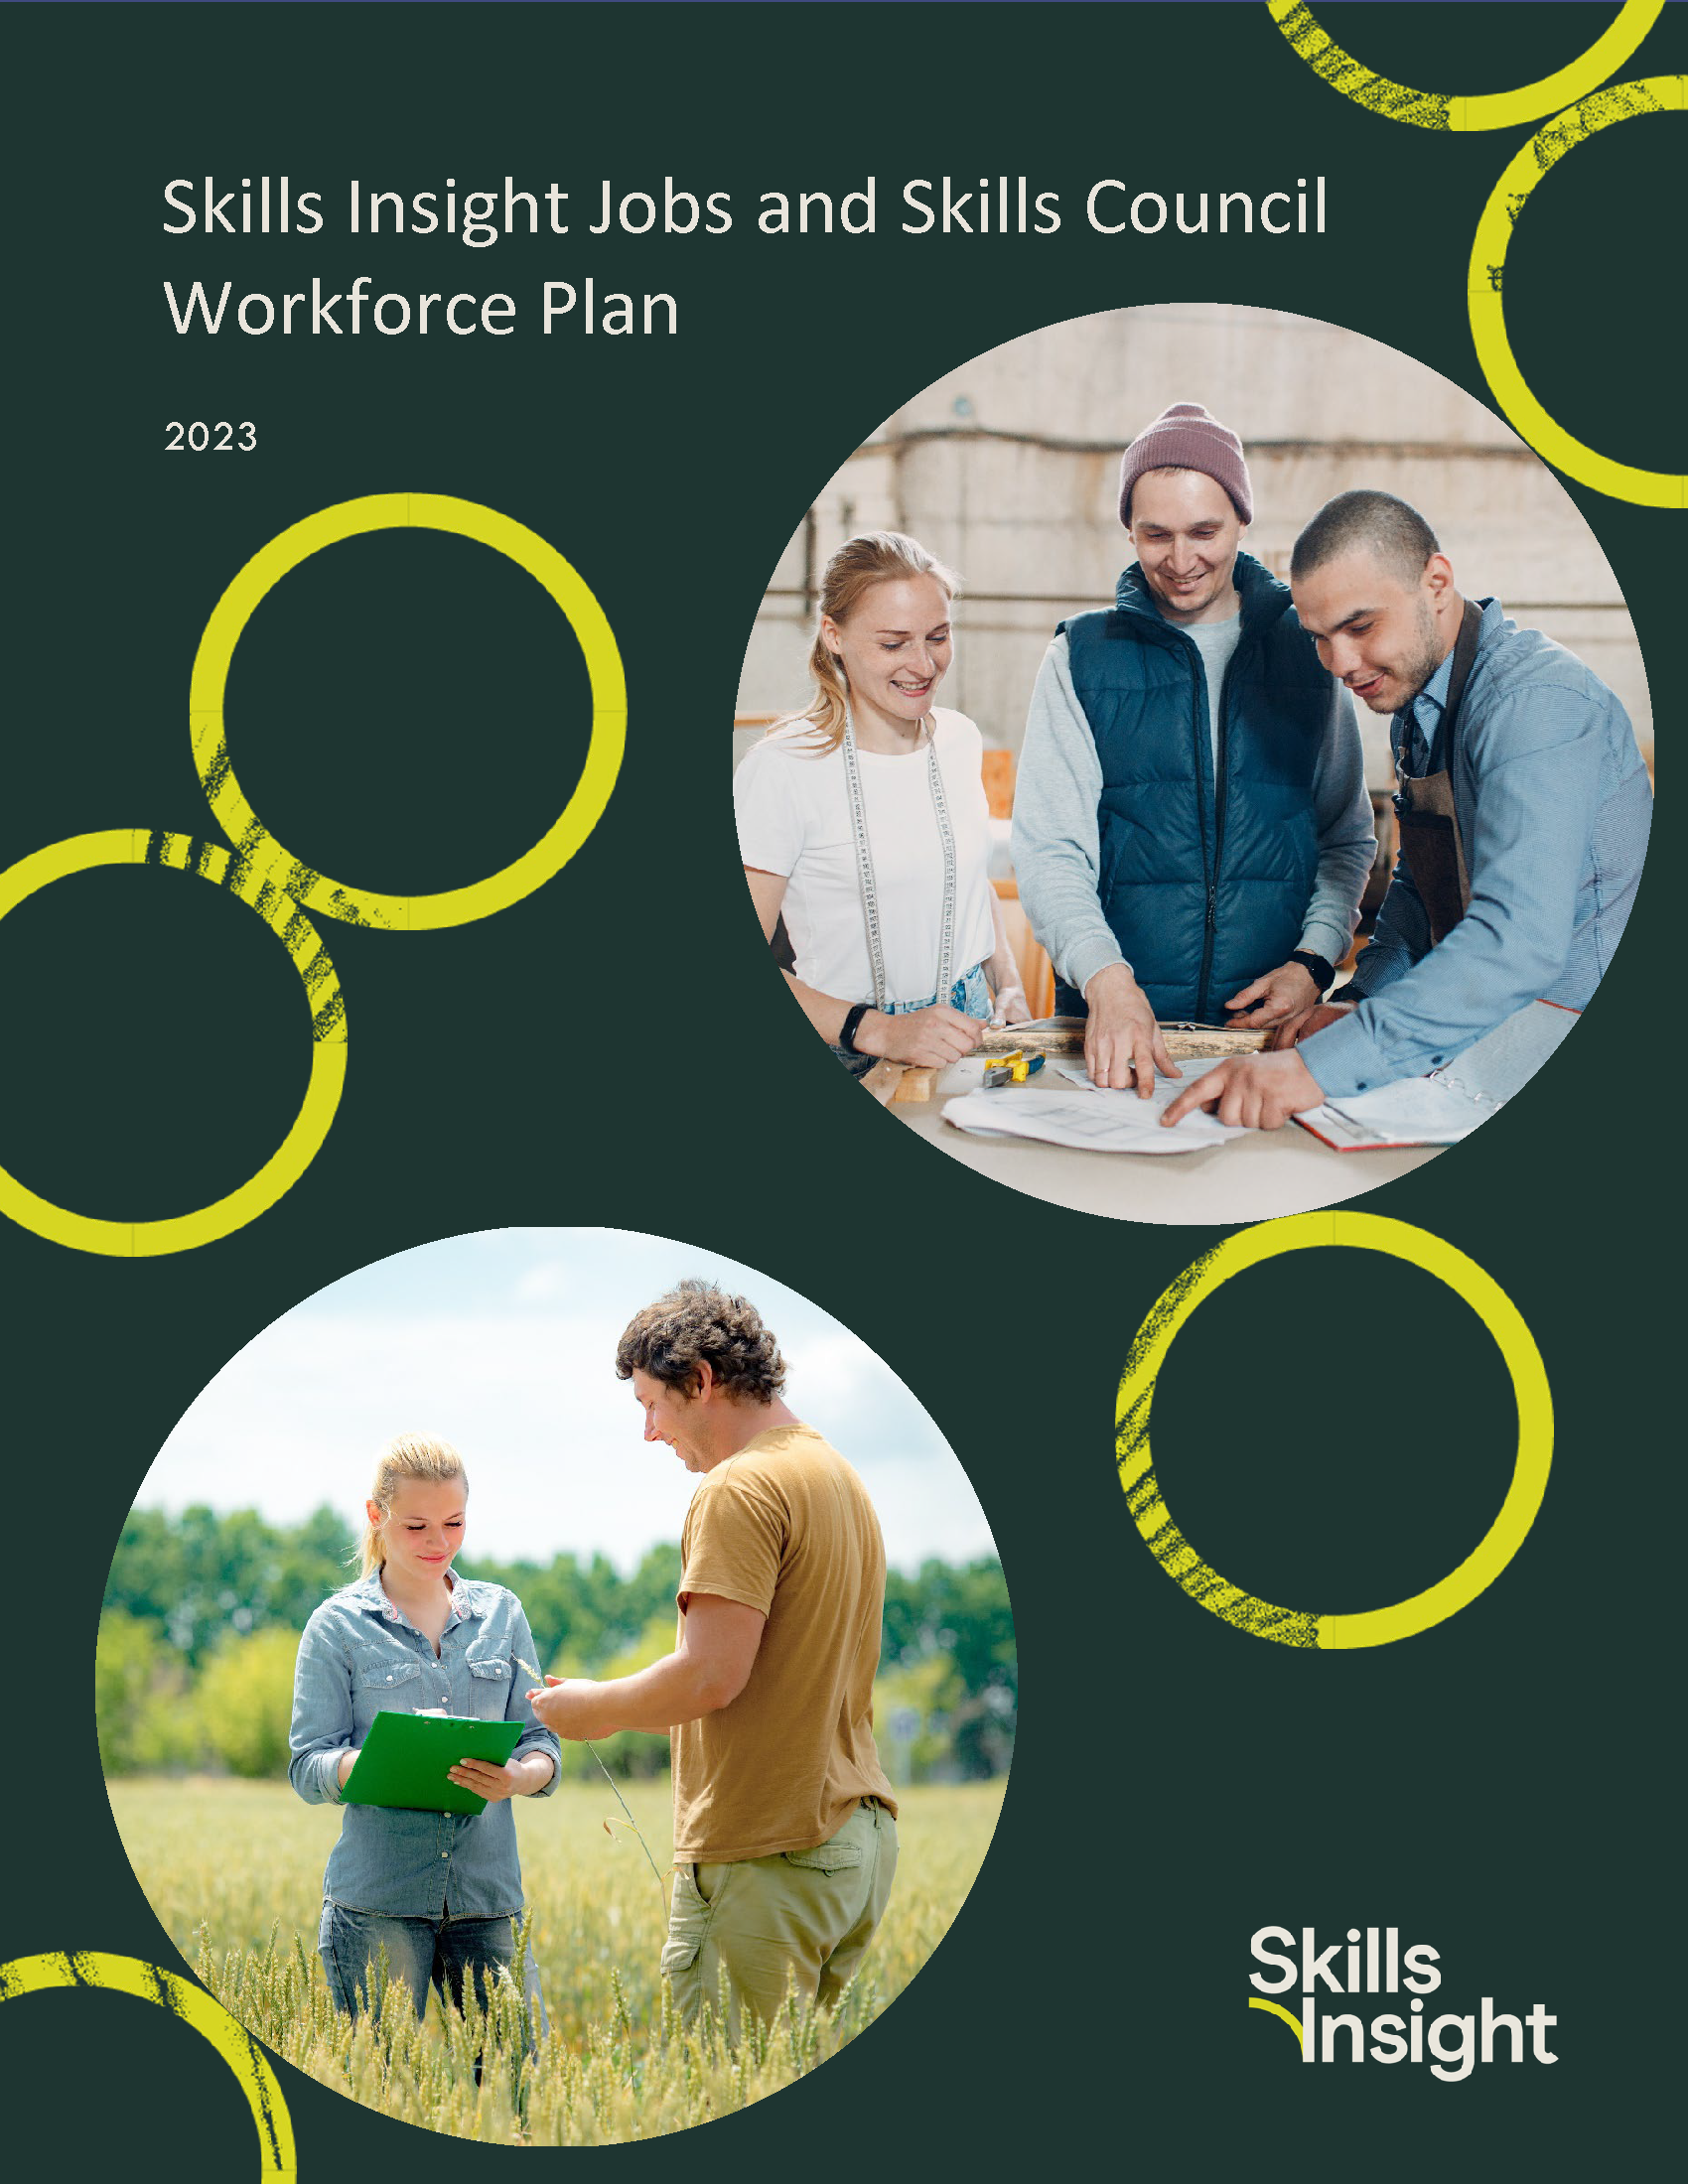 Cover page of Skills Insight JSC Workforce Plan for 2023